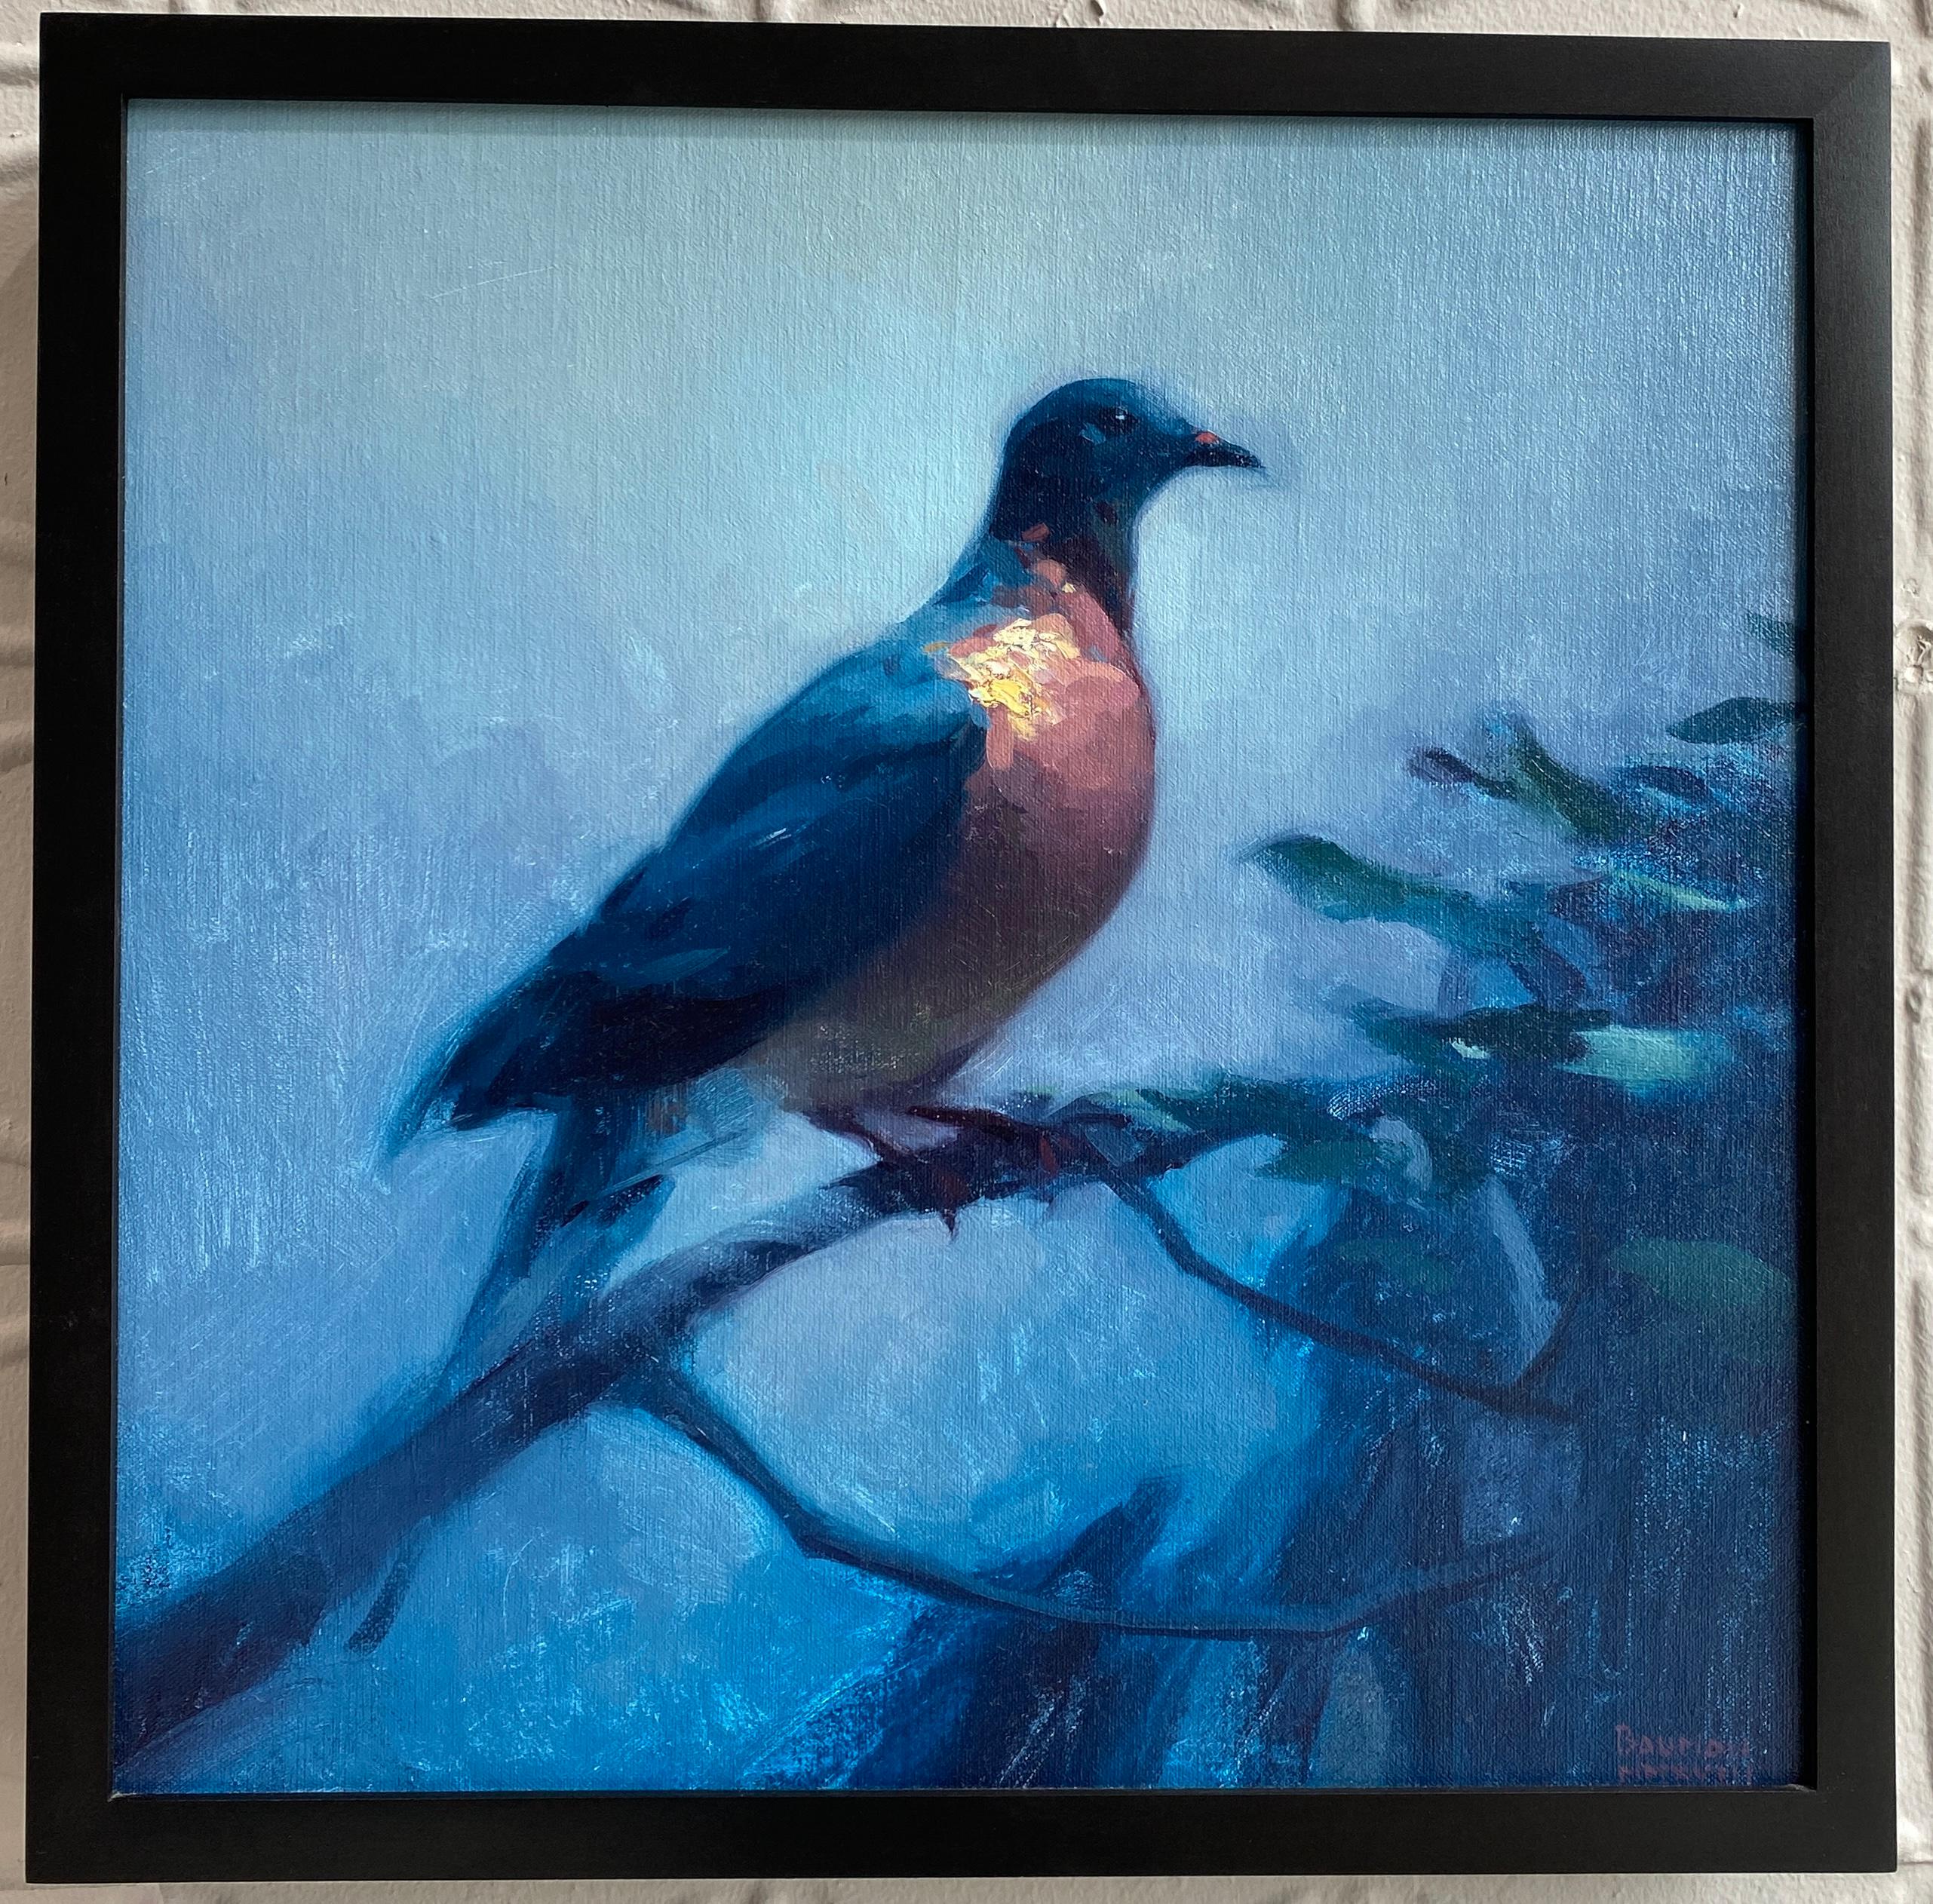 Carrier Pigeon - oil painting by American Realist, moody blue tones - Painting by Stephen Bauman